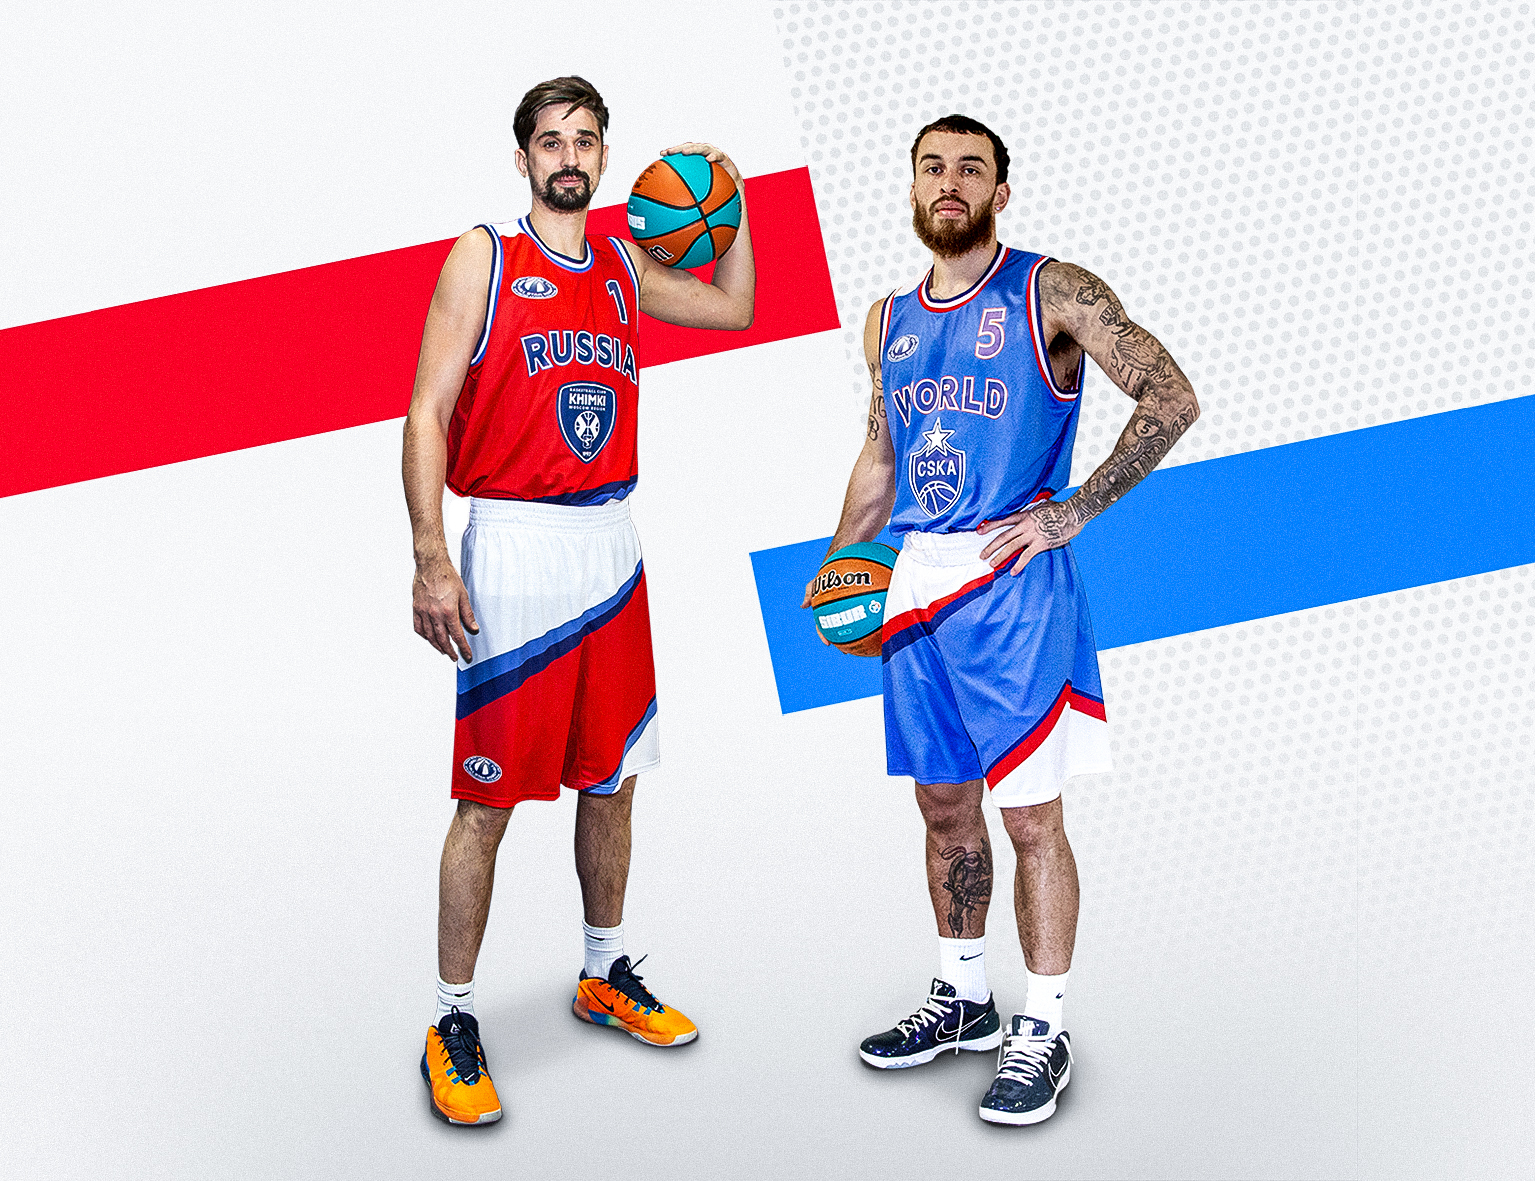 VTB League presents Moscow All-Star Game 2020 teams’ uniforms